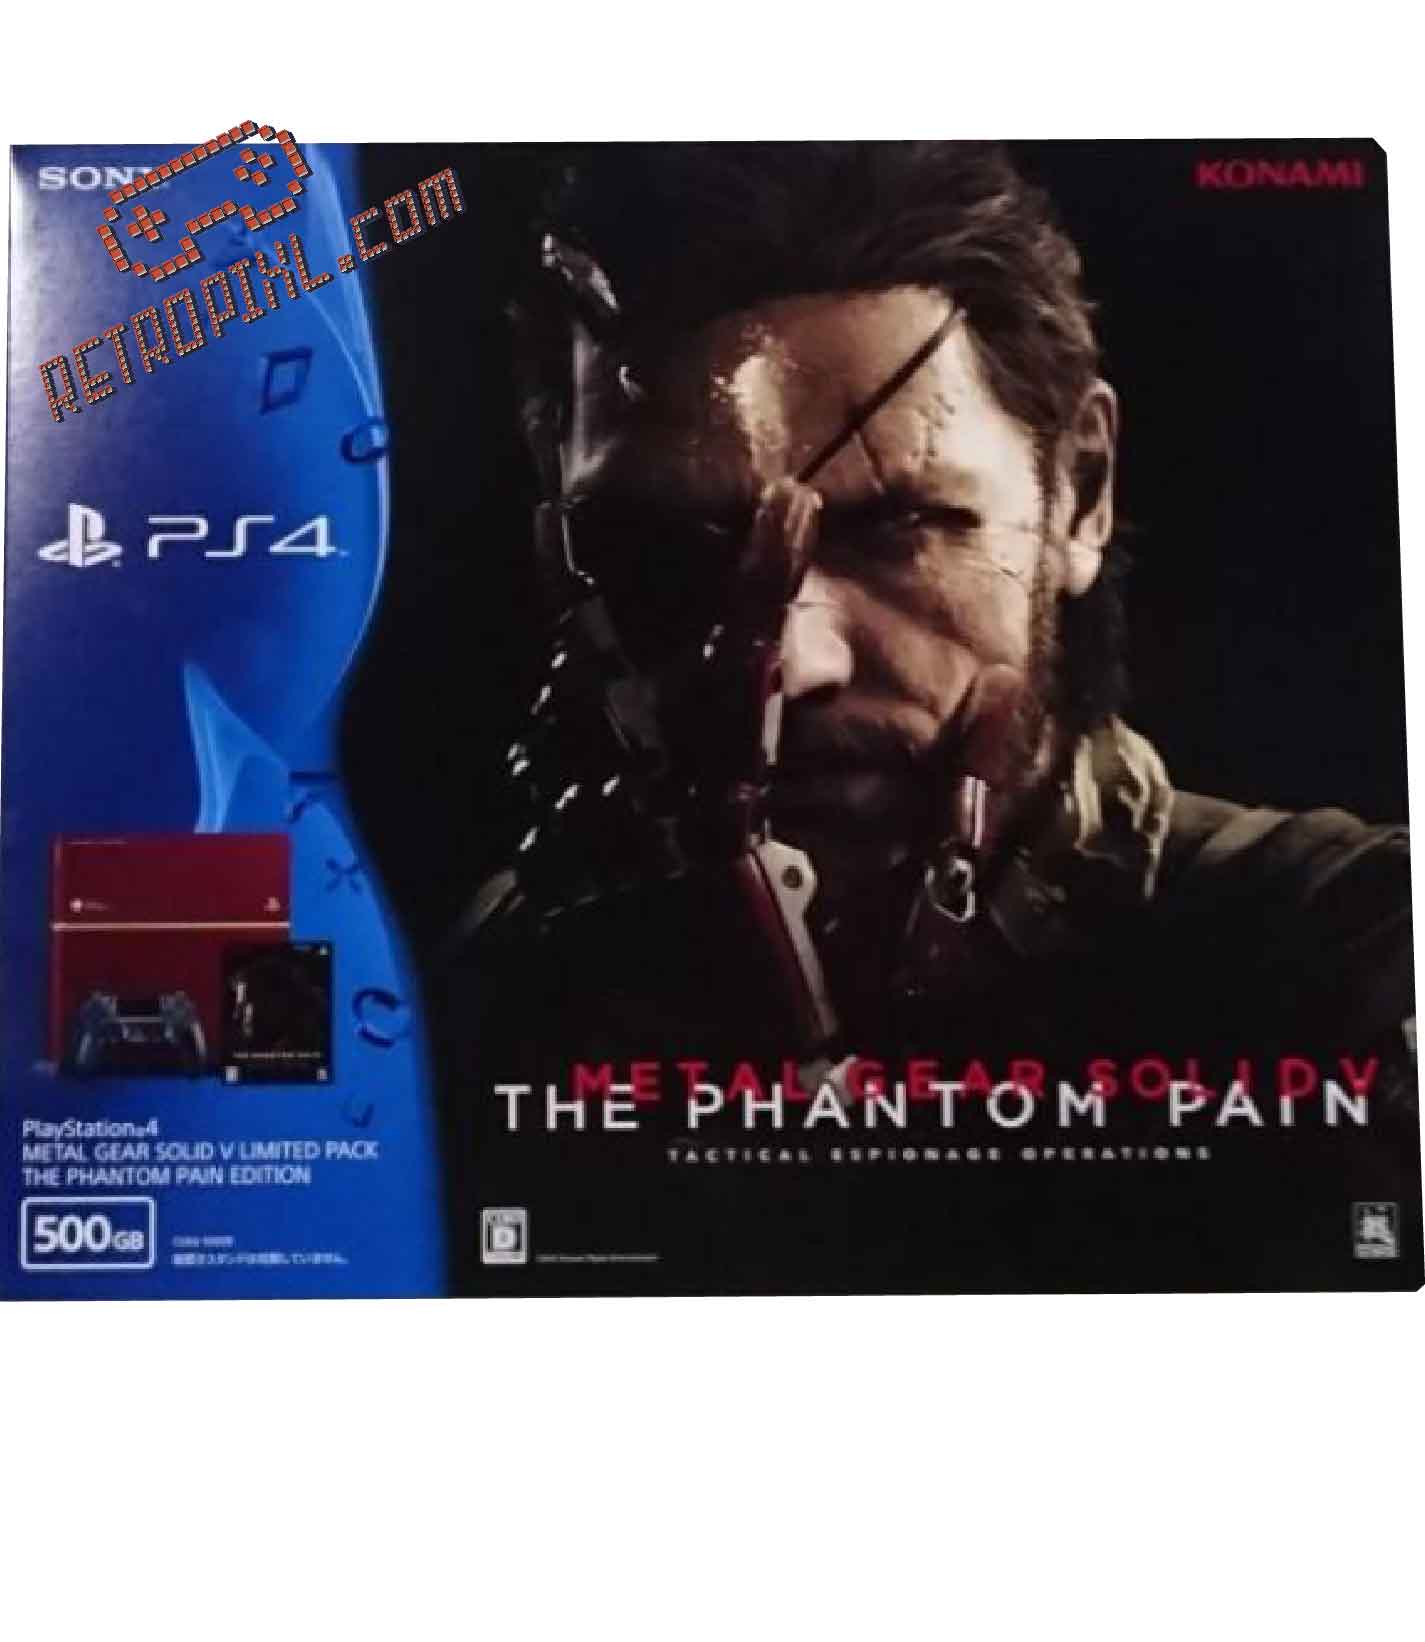 PS4 METAL GEAR SOLD V LIMITED PACK